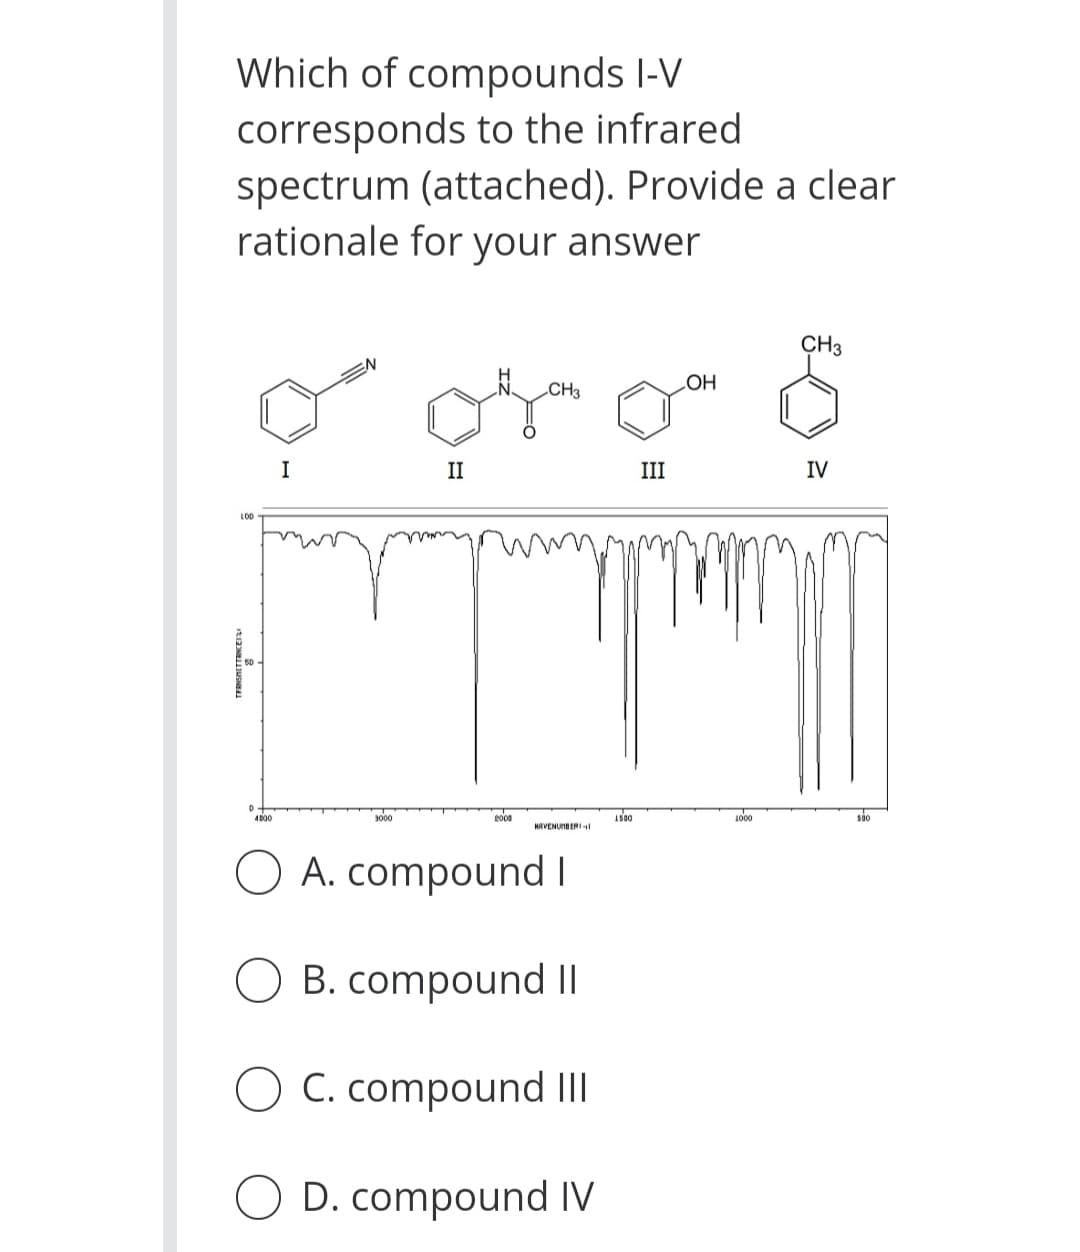 Which of compounds l-V
corresponds to the infrared
spectrum (attached). Provide a clear
rationale for your answer
CH3
CH3
I
II
III
IV
L0D
4000
3000
AS00
1000
so
NAVENUMBERIl
O A. compound I
O B. compound II
C. compound III
O D. compound IV
